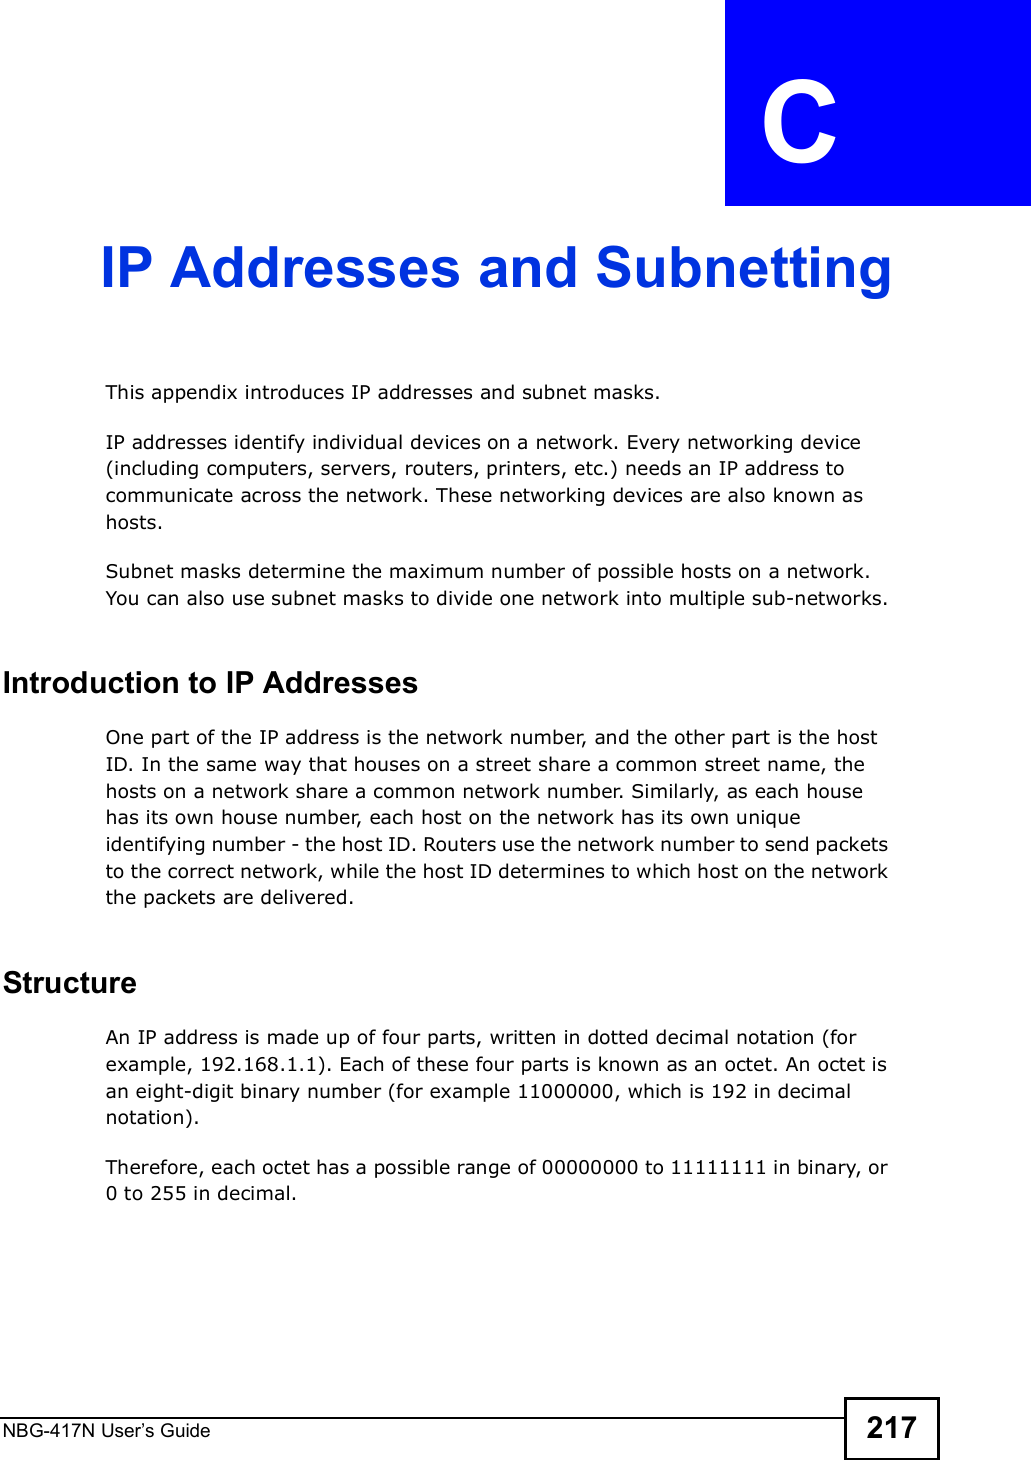 NBG-417N User s Guide 217APPENDIX  C IP Addresses and SubnettingThis appendix introduces IP addresses and subnet masks. IP addresses identify individual devices on a network. Every networking device (including computers, servers, routers, printers, etc.) needs an IP address to communicate across the network. These networking devices are also known as hosts.Subnet masks determine the maximum number of possible hosts on a network. You can also use subnet masks to divide one network into multiple sub-networks.Introduction to IP AddressesOne part of the IP address is the network number, and the other part is the host ID. In the same way that houses on a street share a common street name, the hosts on a network share a common network number. Similarly, as each house has its own house number, each host on the network has its own unique identifying number - the host ID. Routers use the network number to send packets to the correct network, while the host ID determines to which host on the network the packets are delivered.StructureAn IP address is made up of four parts, written in dotted decimal notation (for example, 192.168.1.1). Each of these four parts is known as an octet. An octet is an eight-digit binary number (for example 11000000, which is 192 in decimal notation). Therefore, each octet has a possible range of 00000000 to 11111111 in binary, or 0 to 255 in decimal.